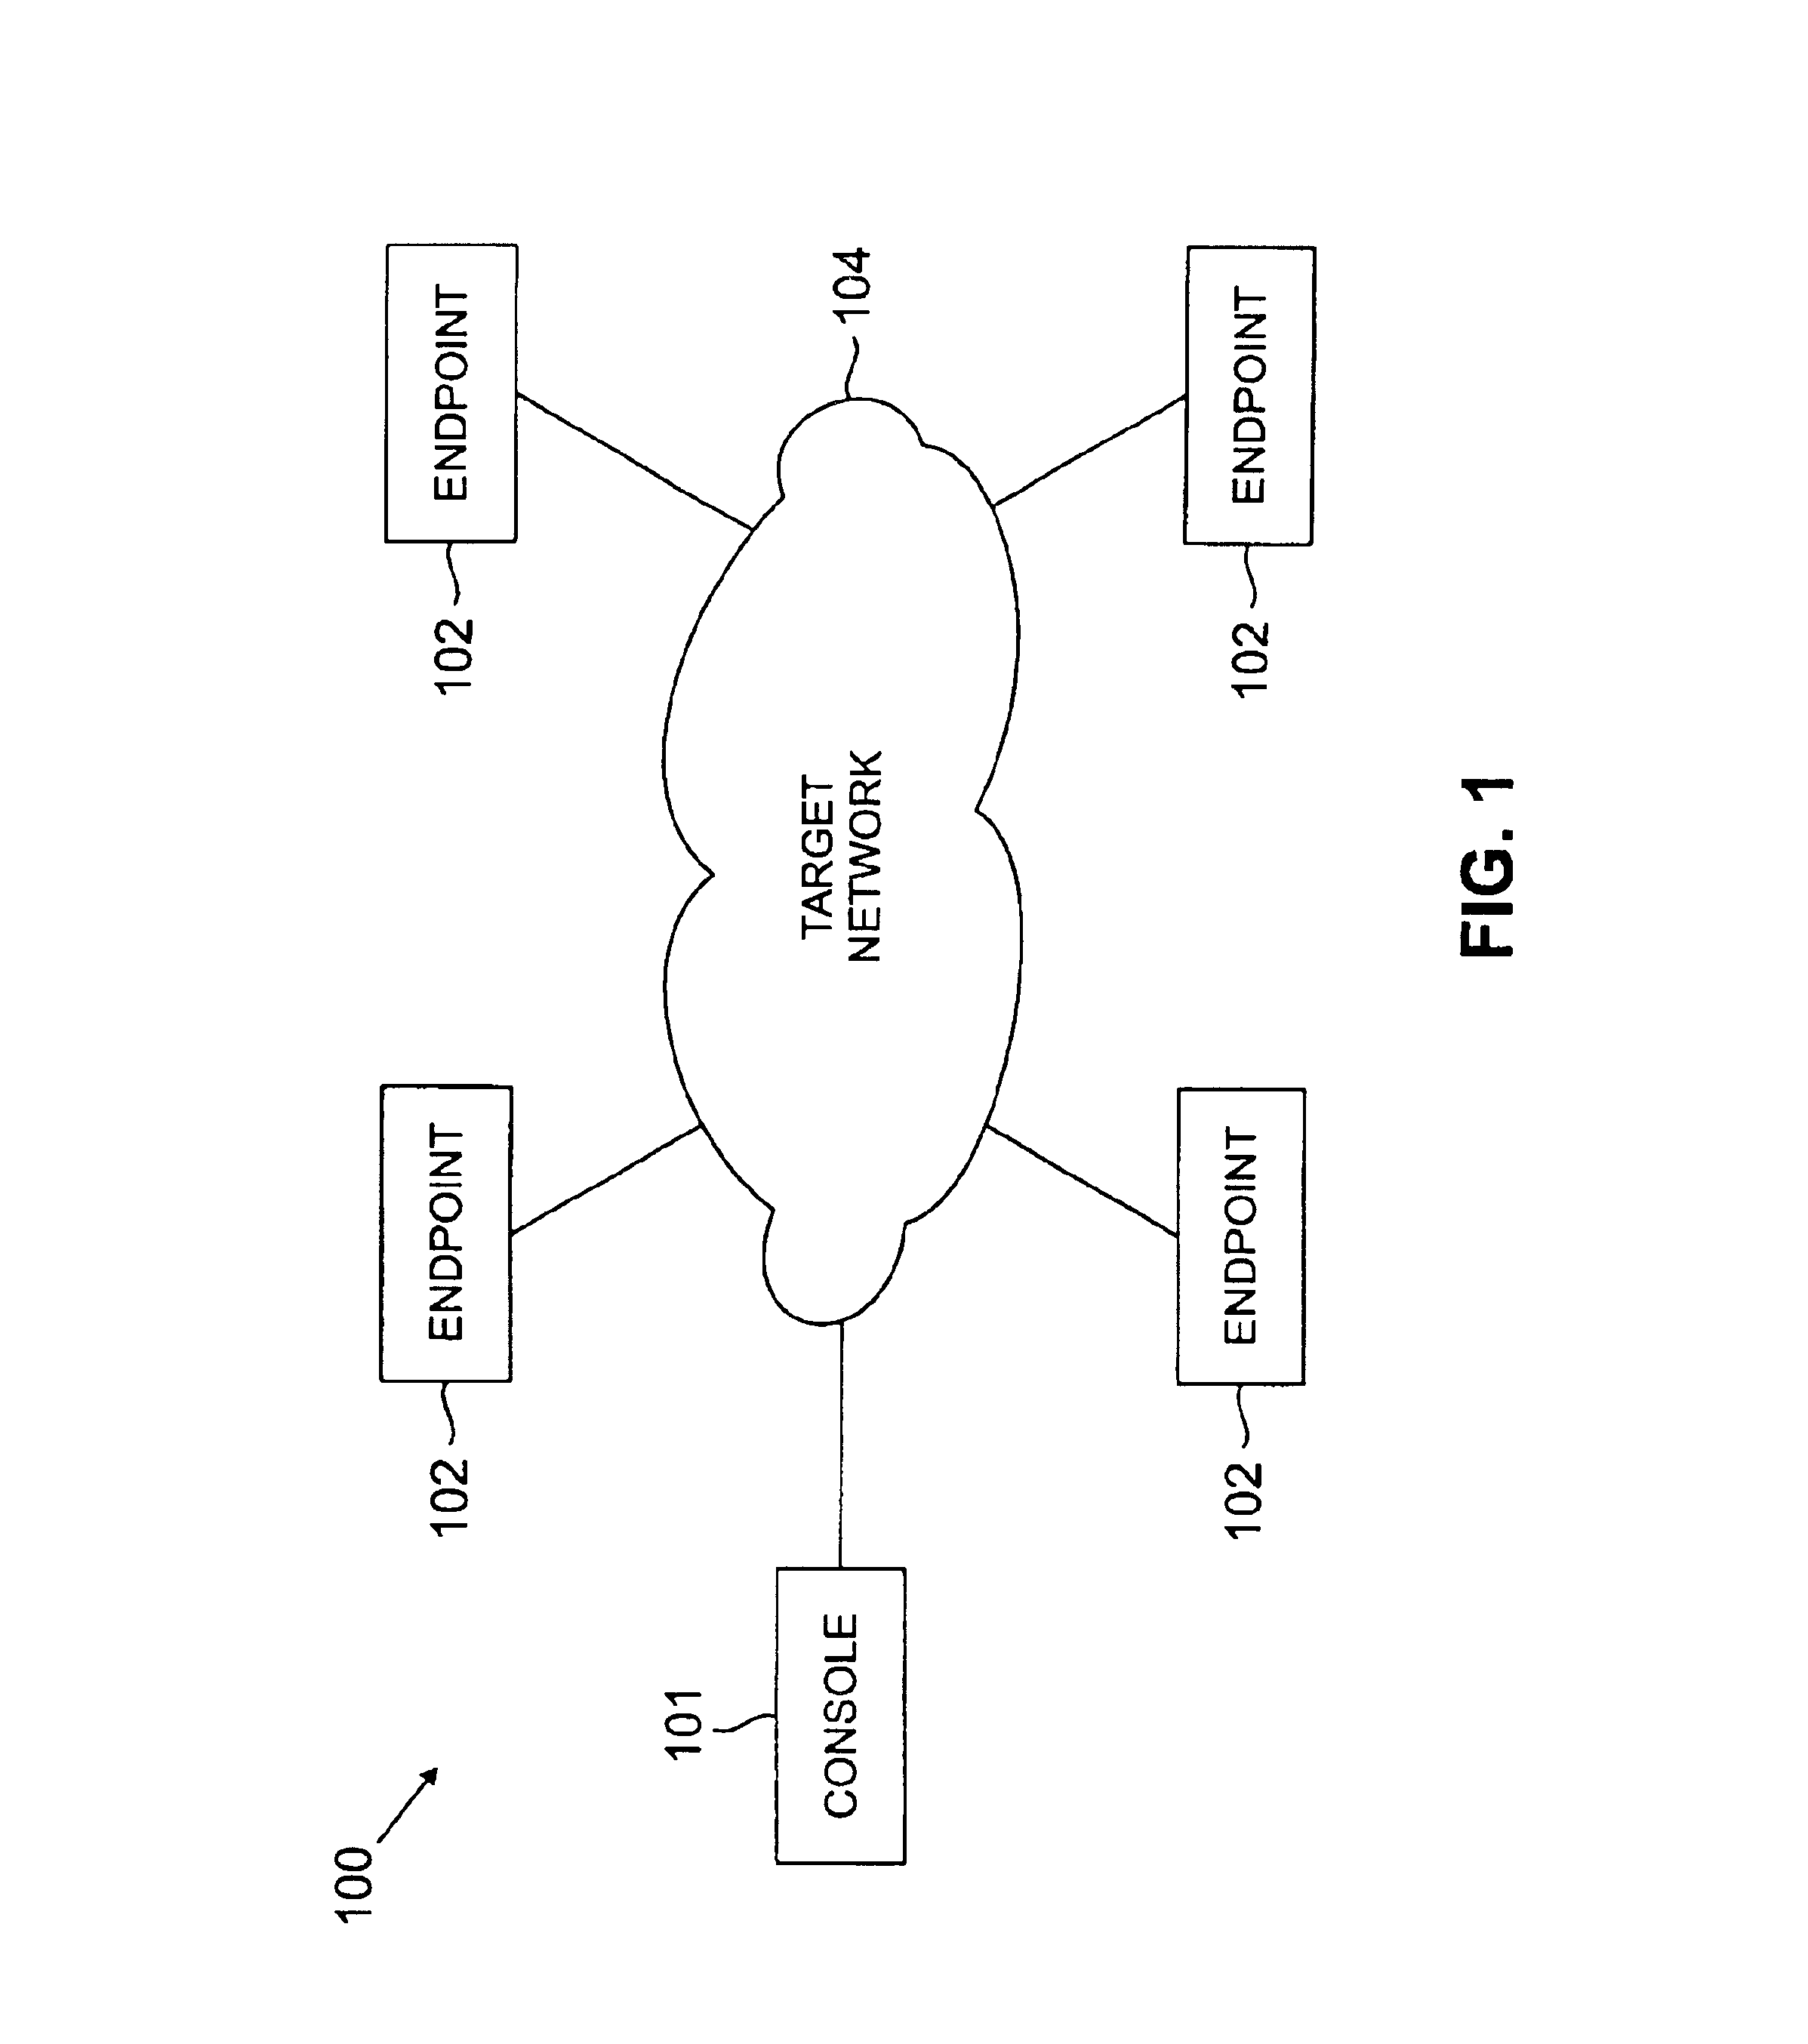 Framework for flexible and scalable real-time traffic emulation for packet switched networks